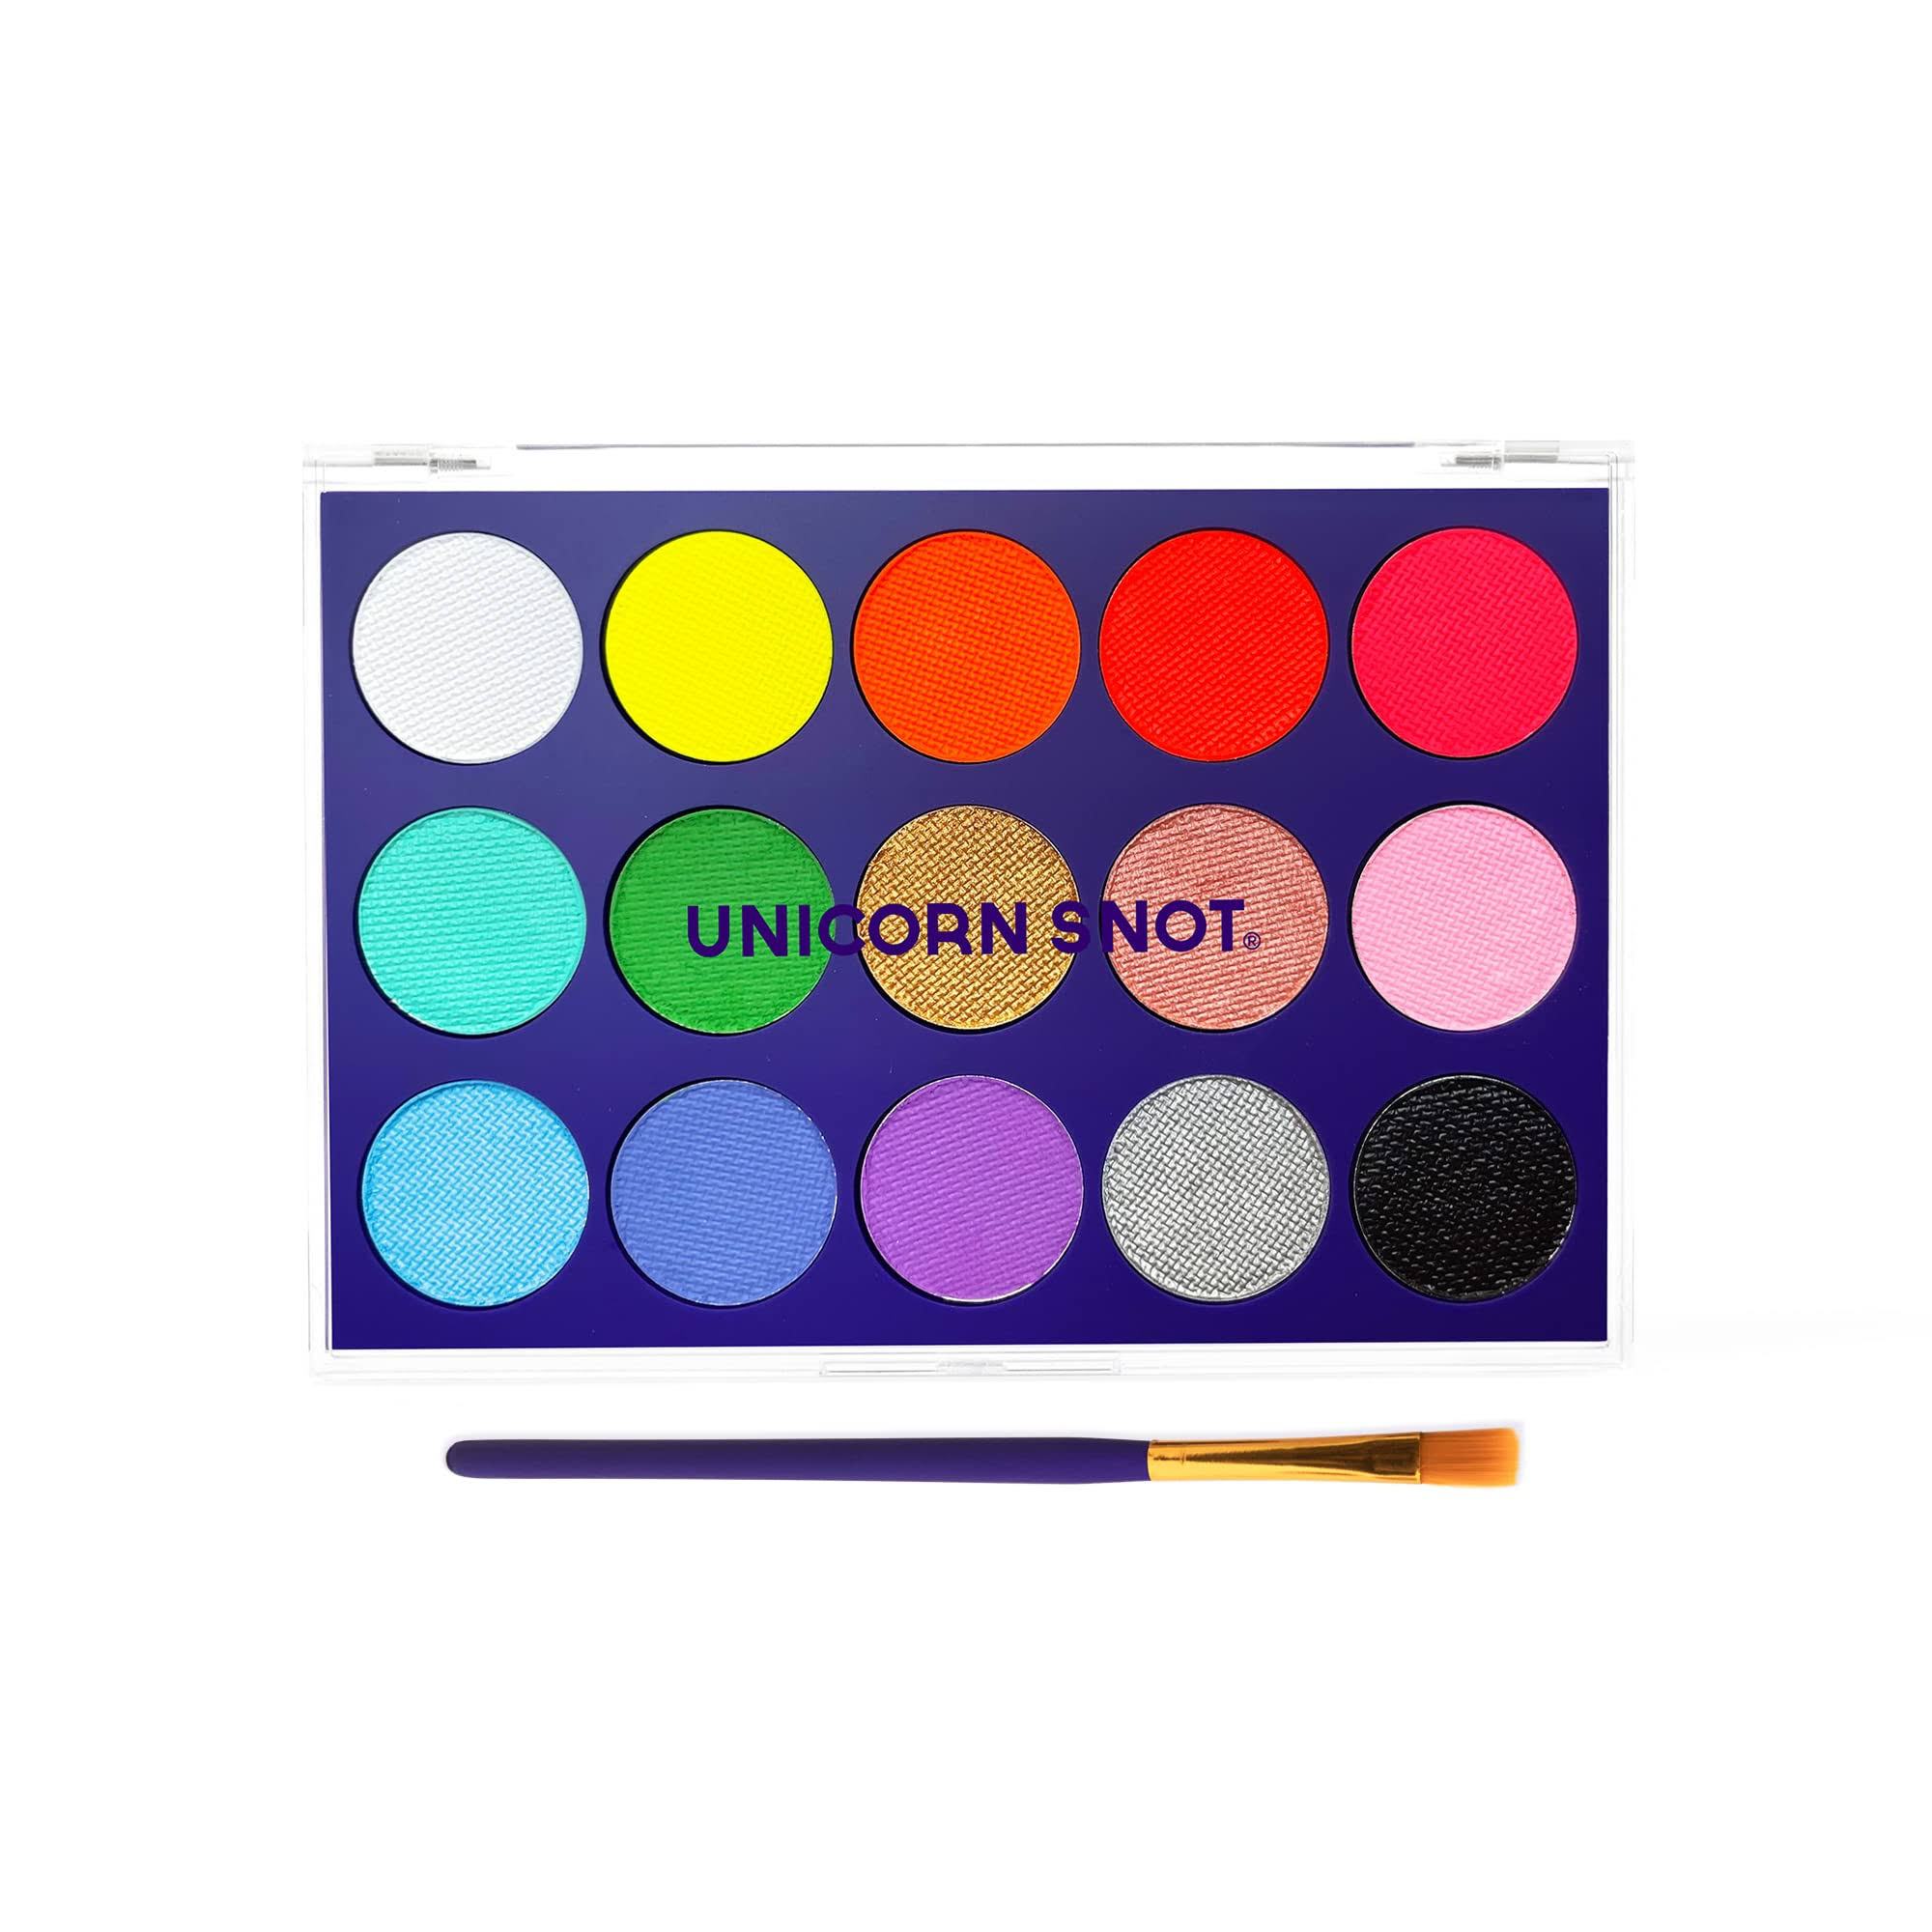 Unicorn Snot Body Paint & Face Paint Palette | 15 Shades | Highly-Pigmented Face + Body Makeup | Christmas Gifts Ideas, Holiday Face Paint Glitter